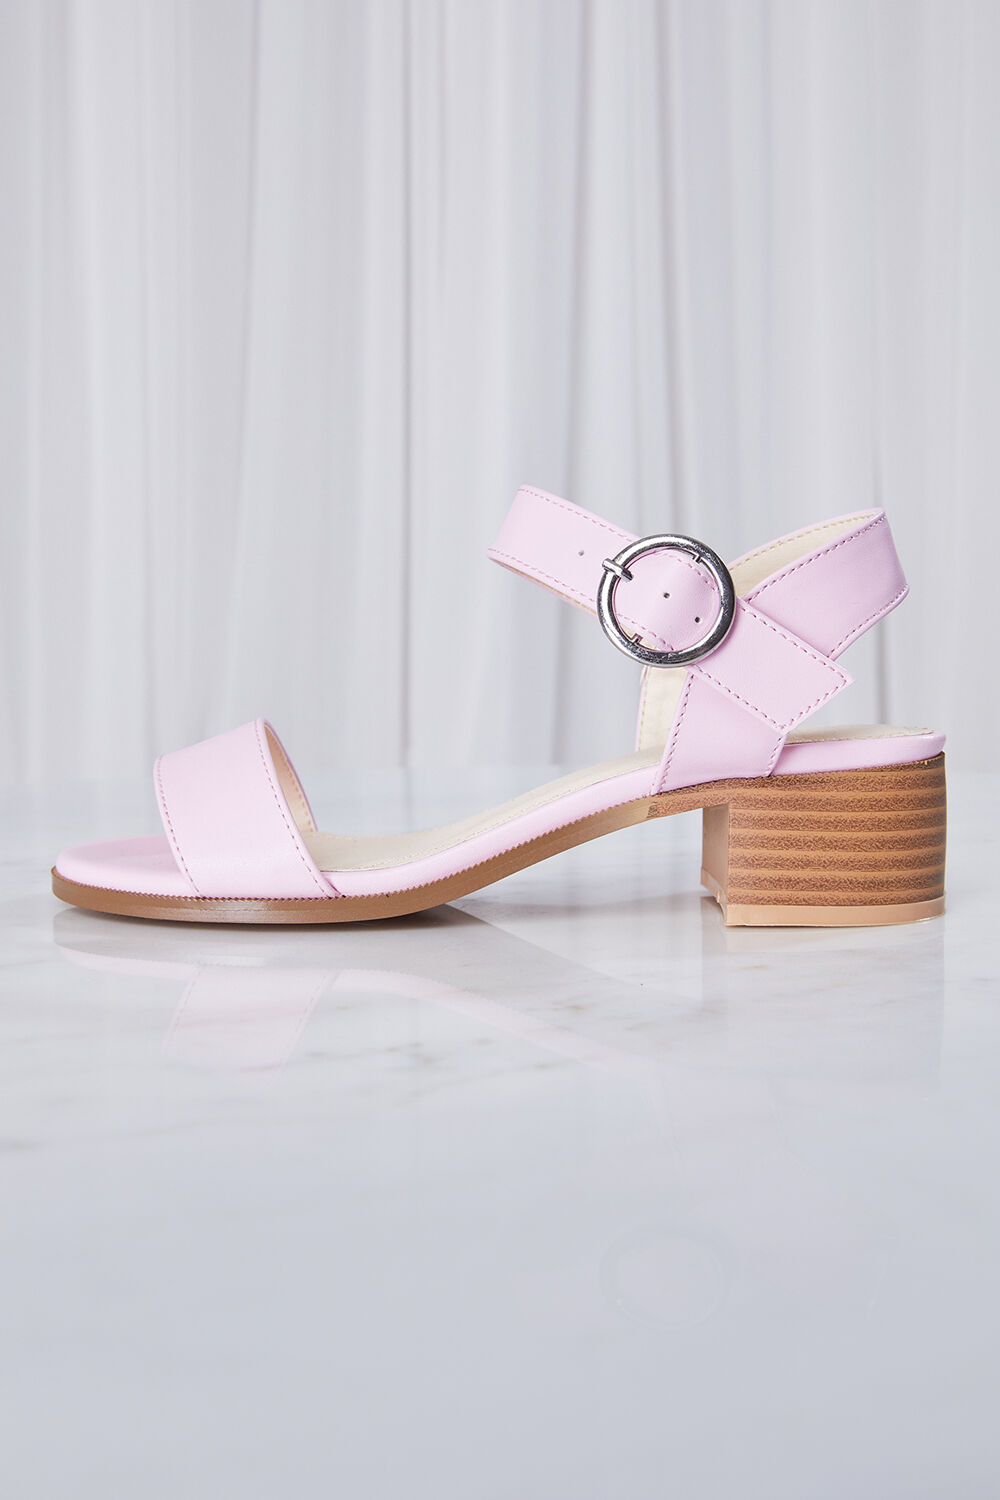 BUCKLE HEEL in colour PARADISE PINK